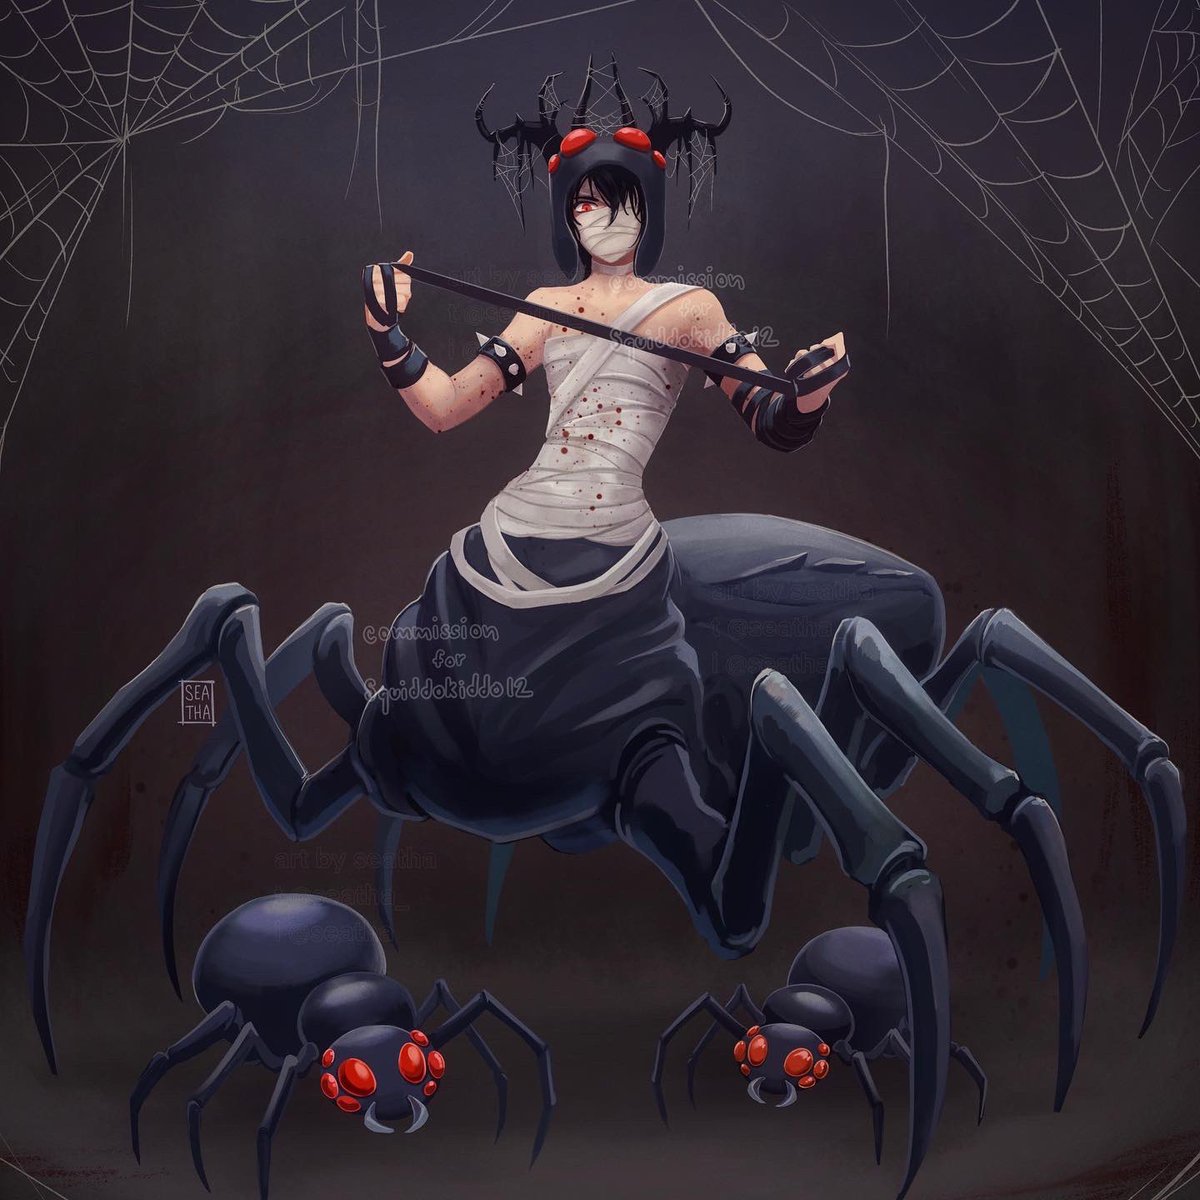 Pho Has Lots Of Work To Do On Twitter Roblox Commission This Looks So Great But I Am So Curious About The Reference You Were Given - roblox spider legs